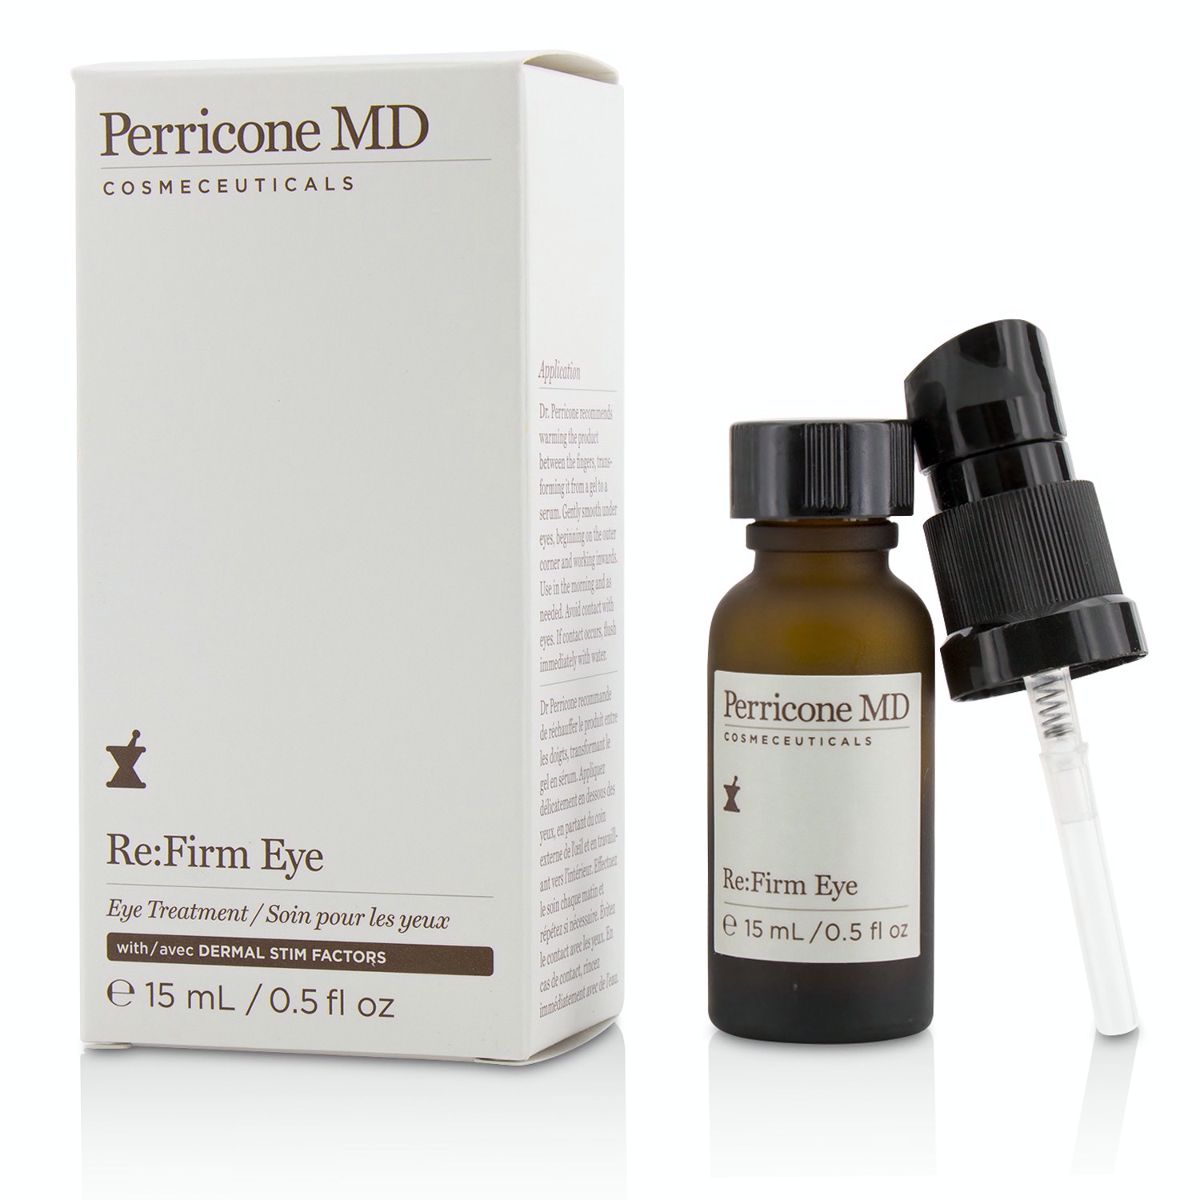 Re: Firm Eye Treatment Perricone MD Image